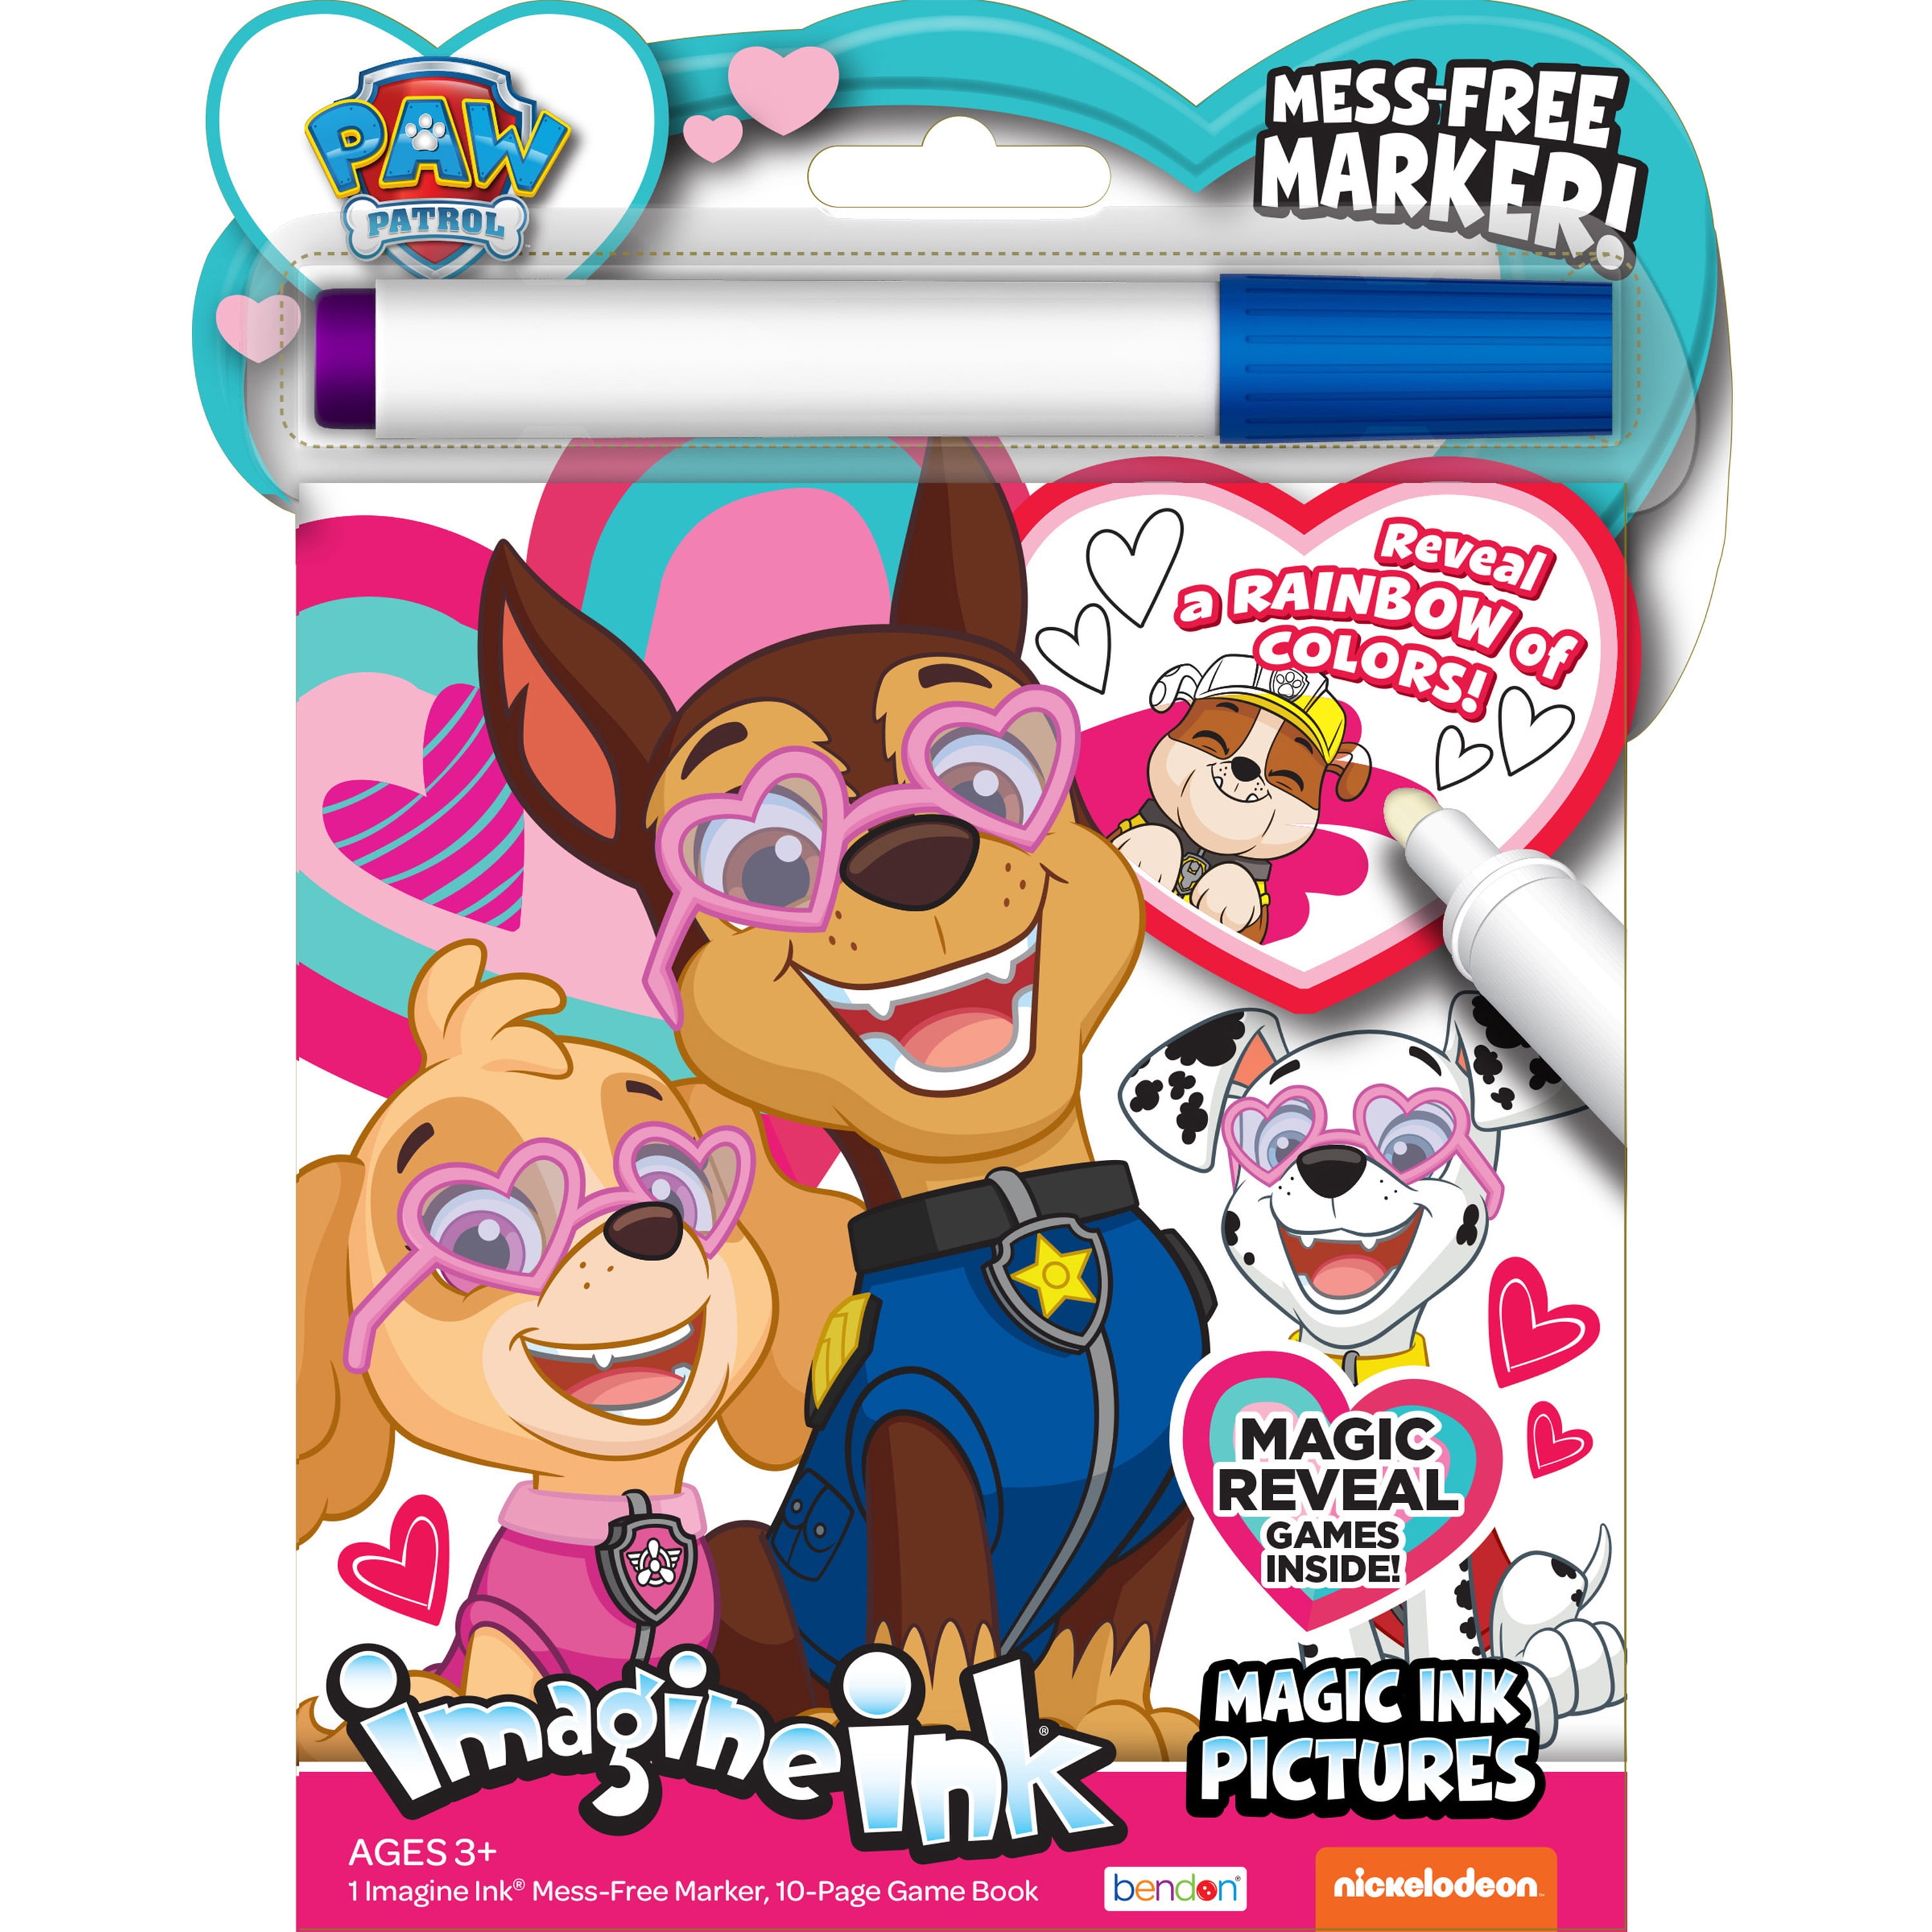 Nickelodeon Paw Patrol 10 Page Valentine's Day Imagine Ink Coloring Book  with Mess Free Marker, Paperback 